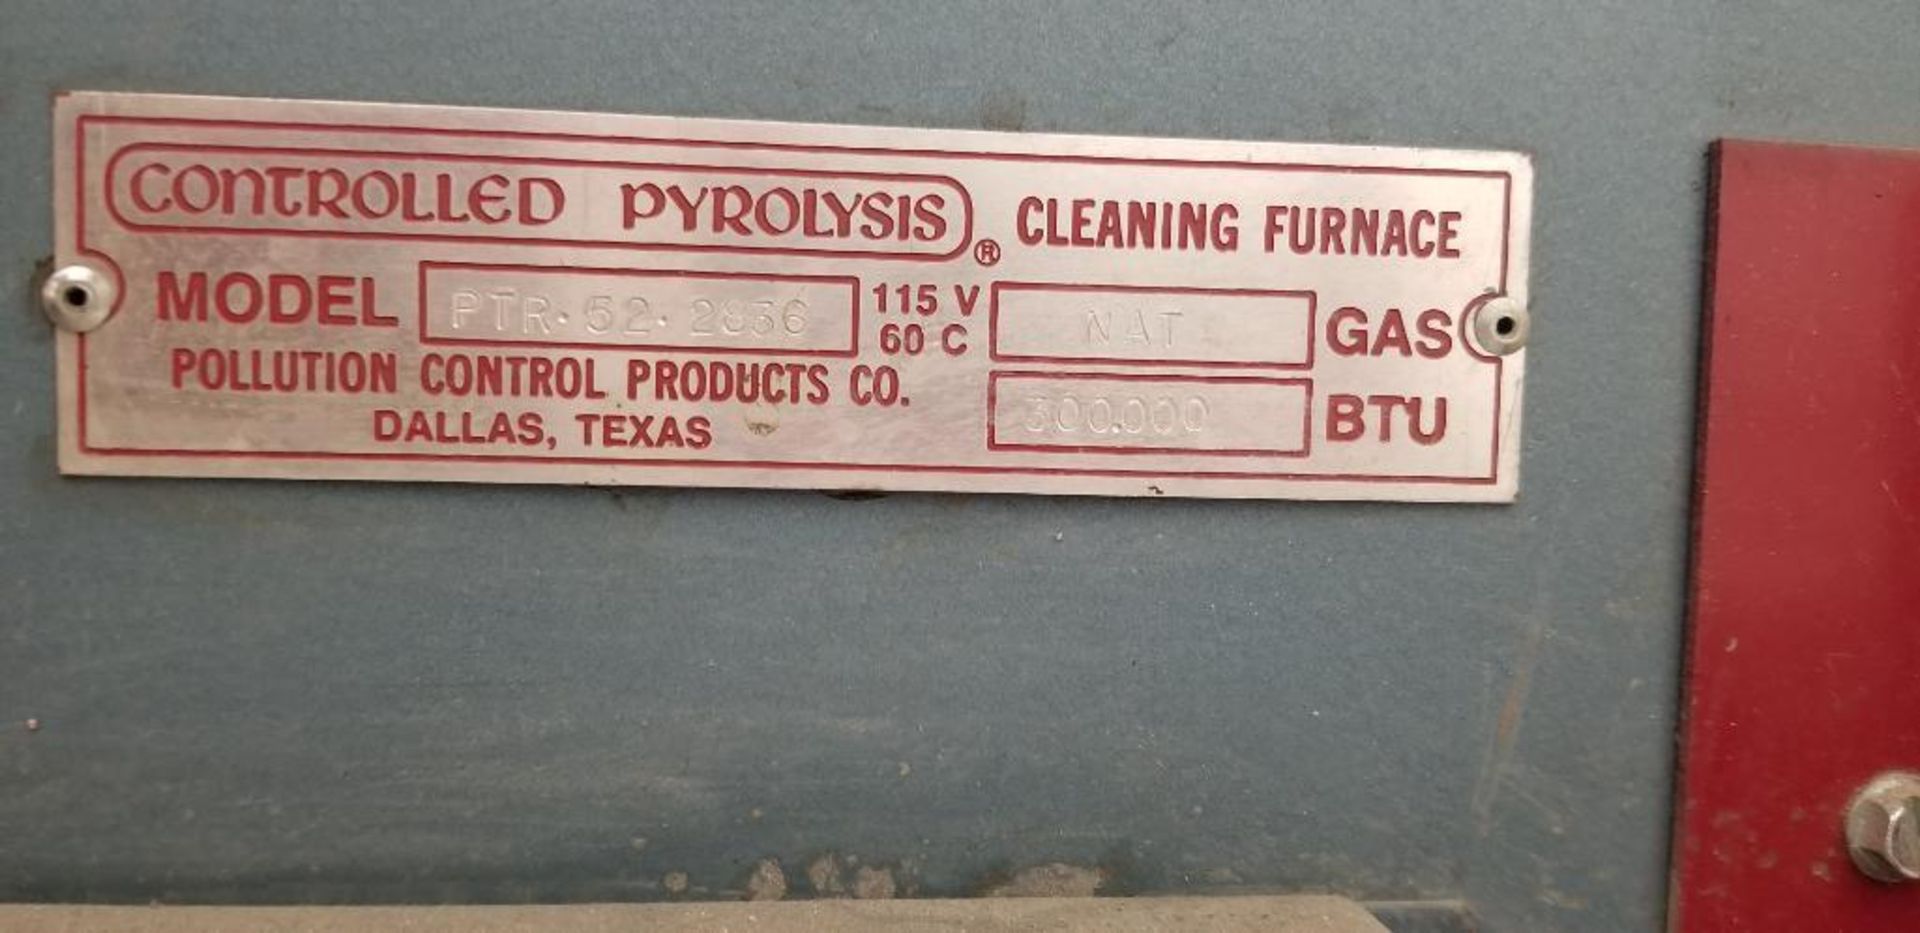 Pollution Control Products Controlled Pyrolysis Cleaning Furnace, Model PTR-52-2836, Natural Gas 300 - Image 4 of 4